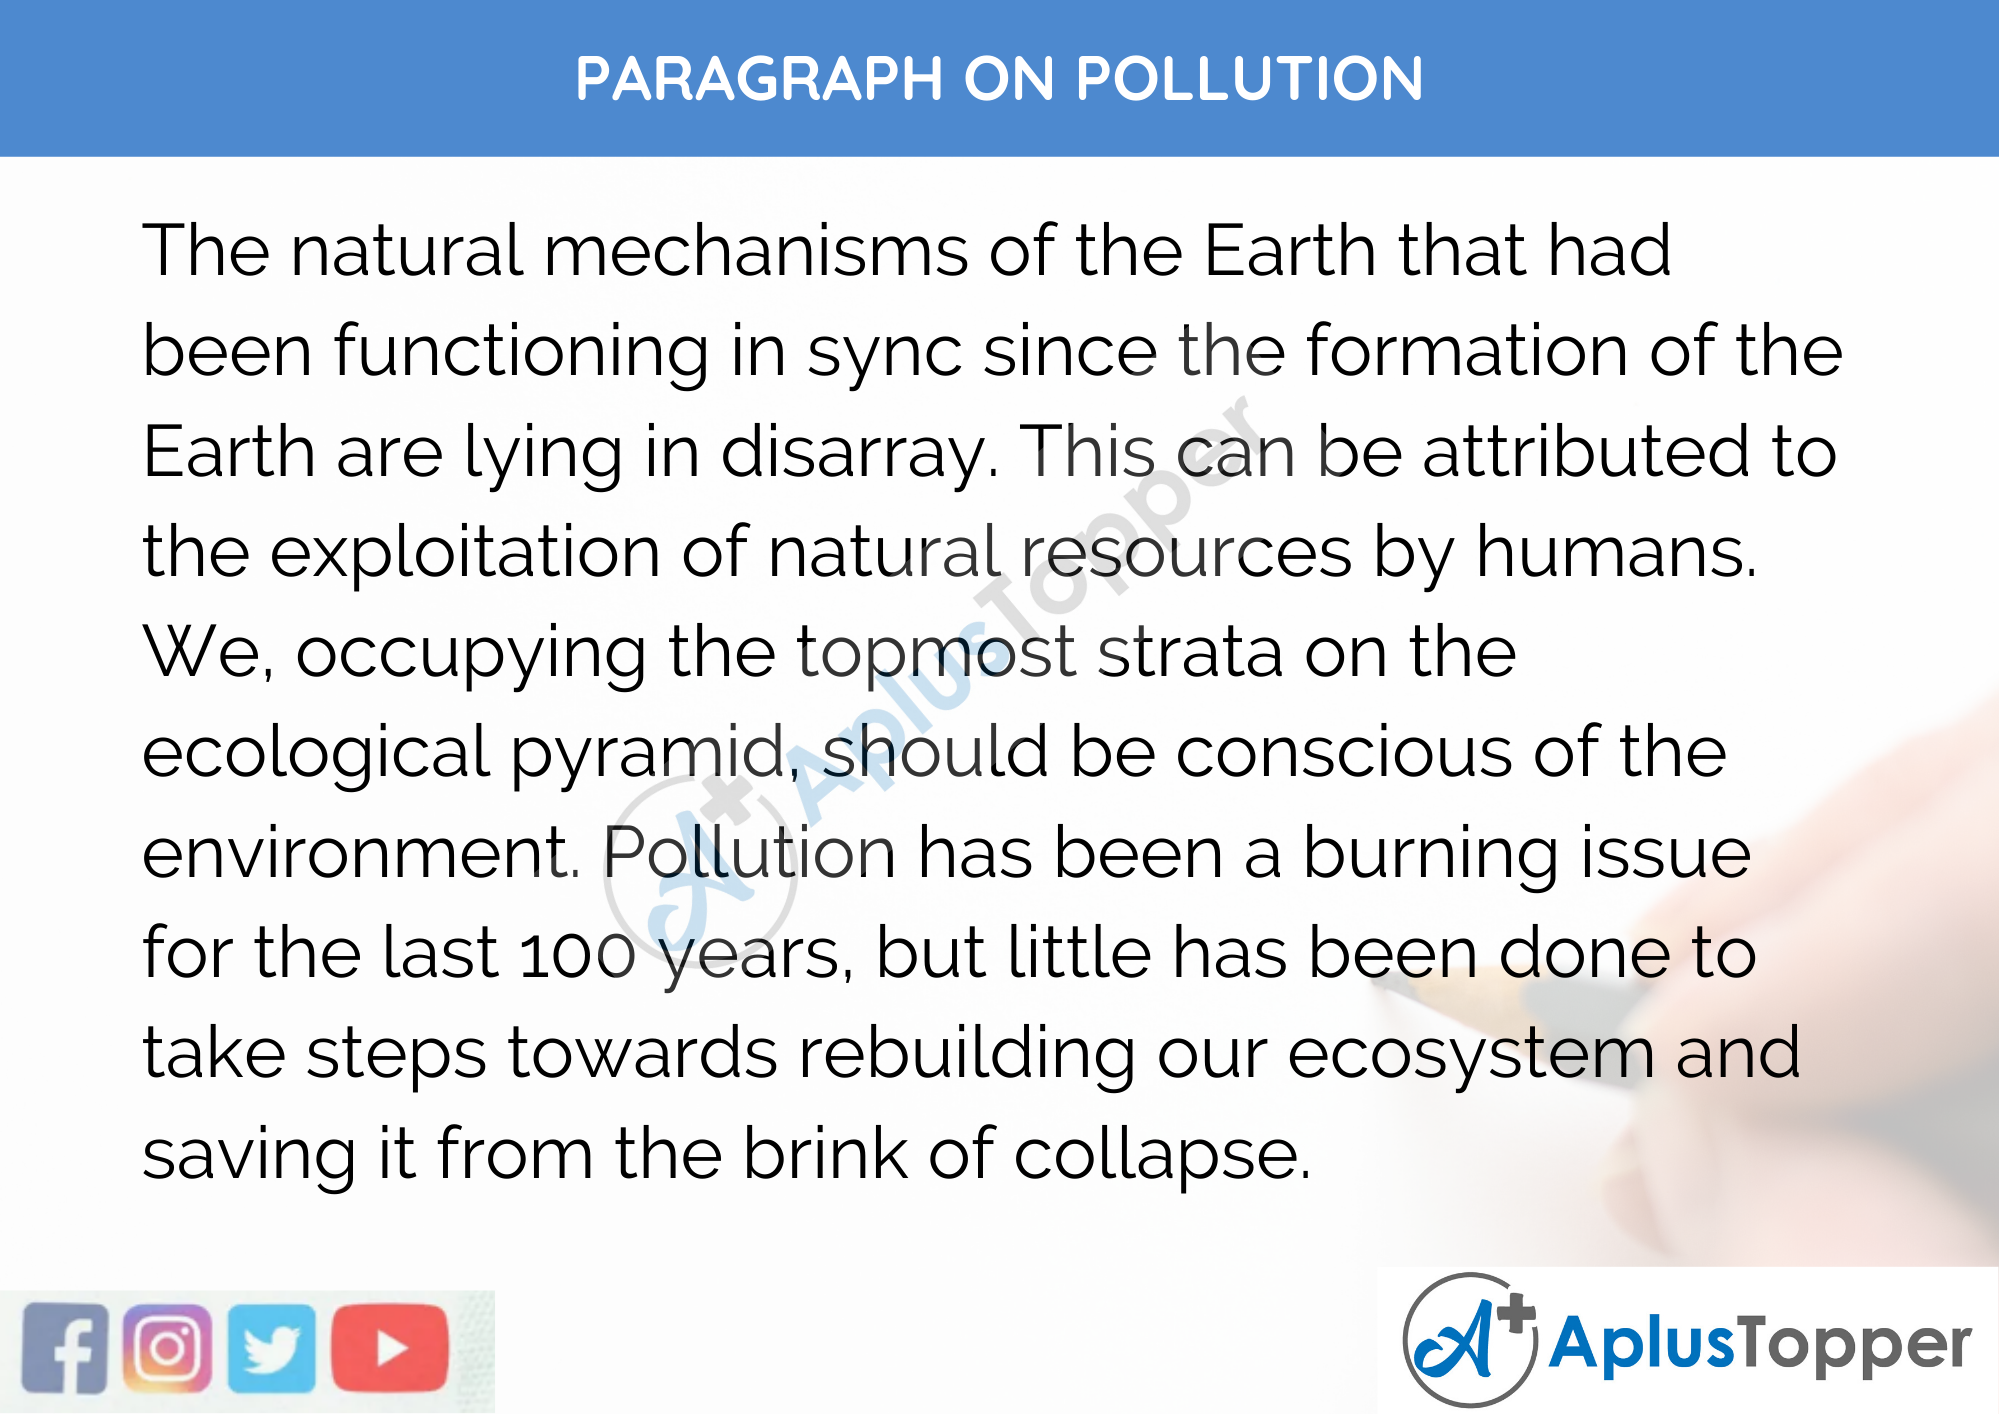 speech on pollution and its effects